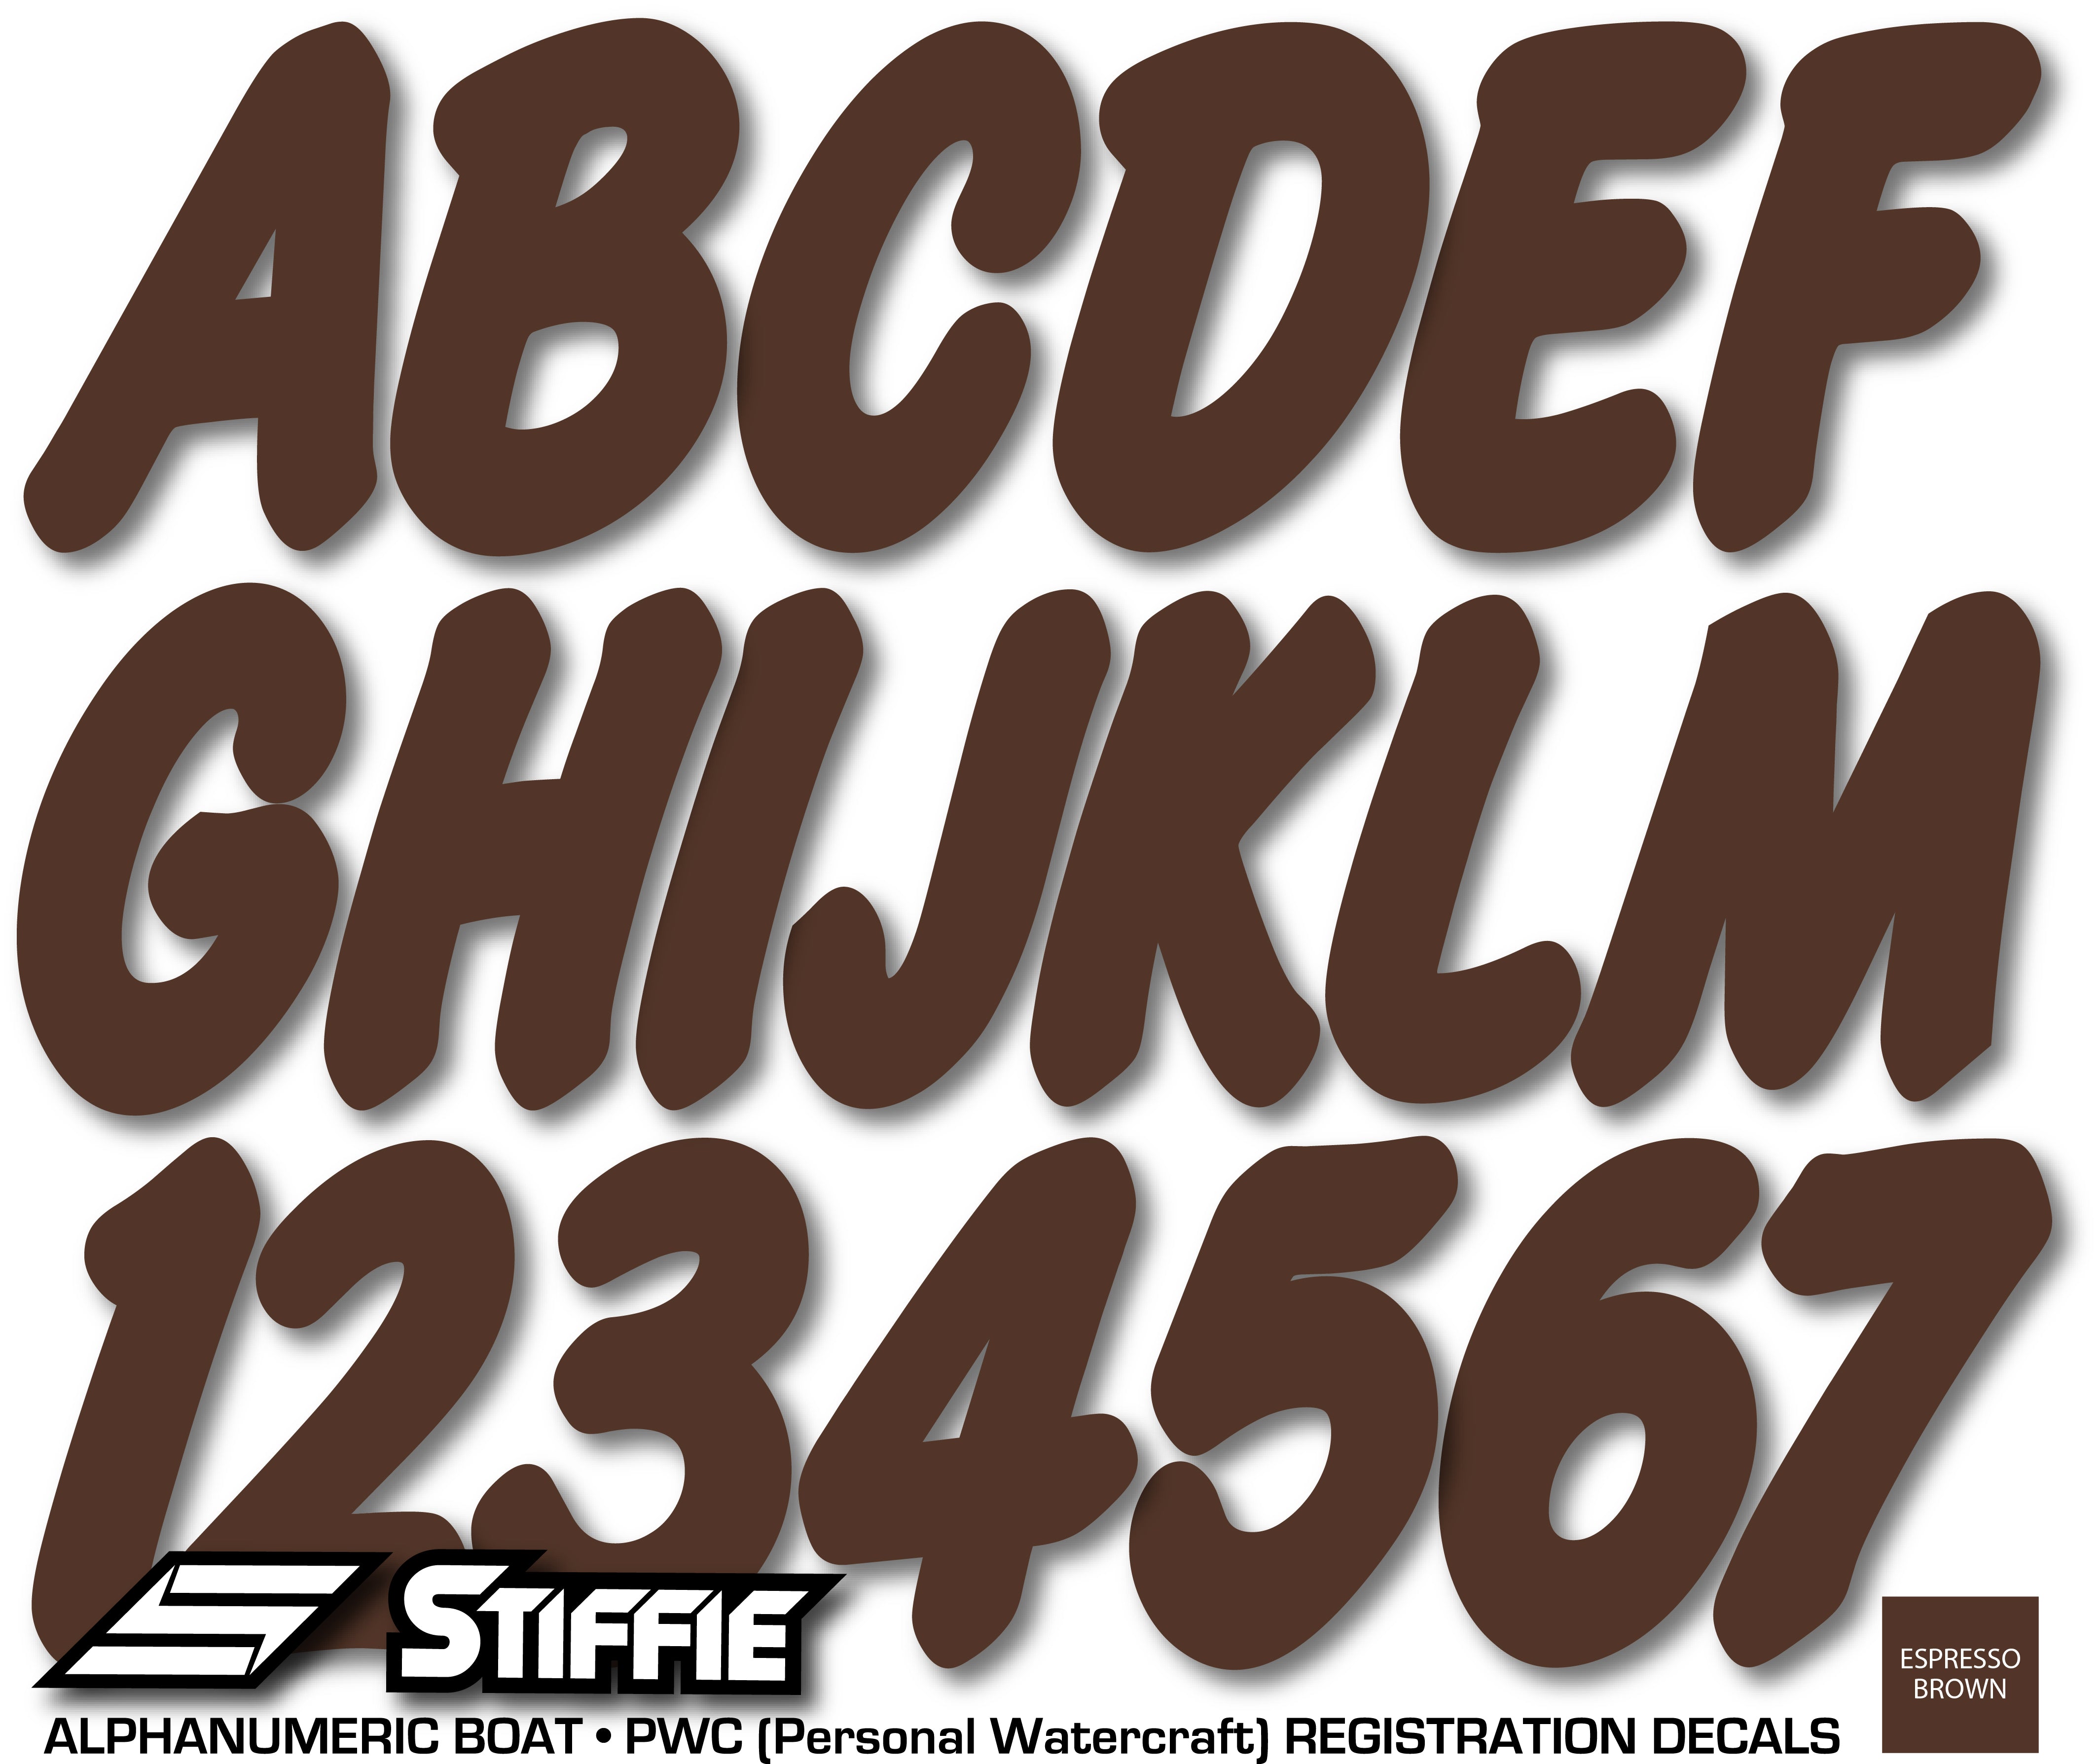 STIFFIE Whip-One Espresso Brown 3" Alpha-Numeric Registration Identification Numbers Stickers Decals for Boats & Personal Watercraft